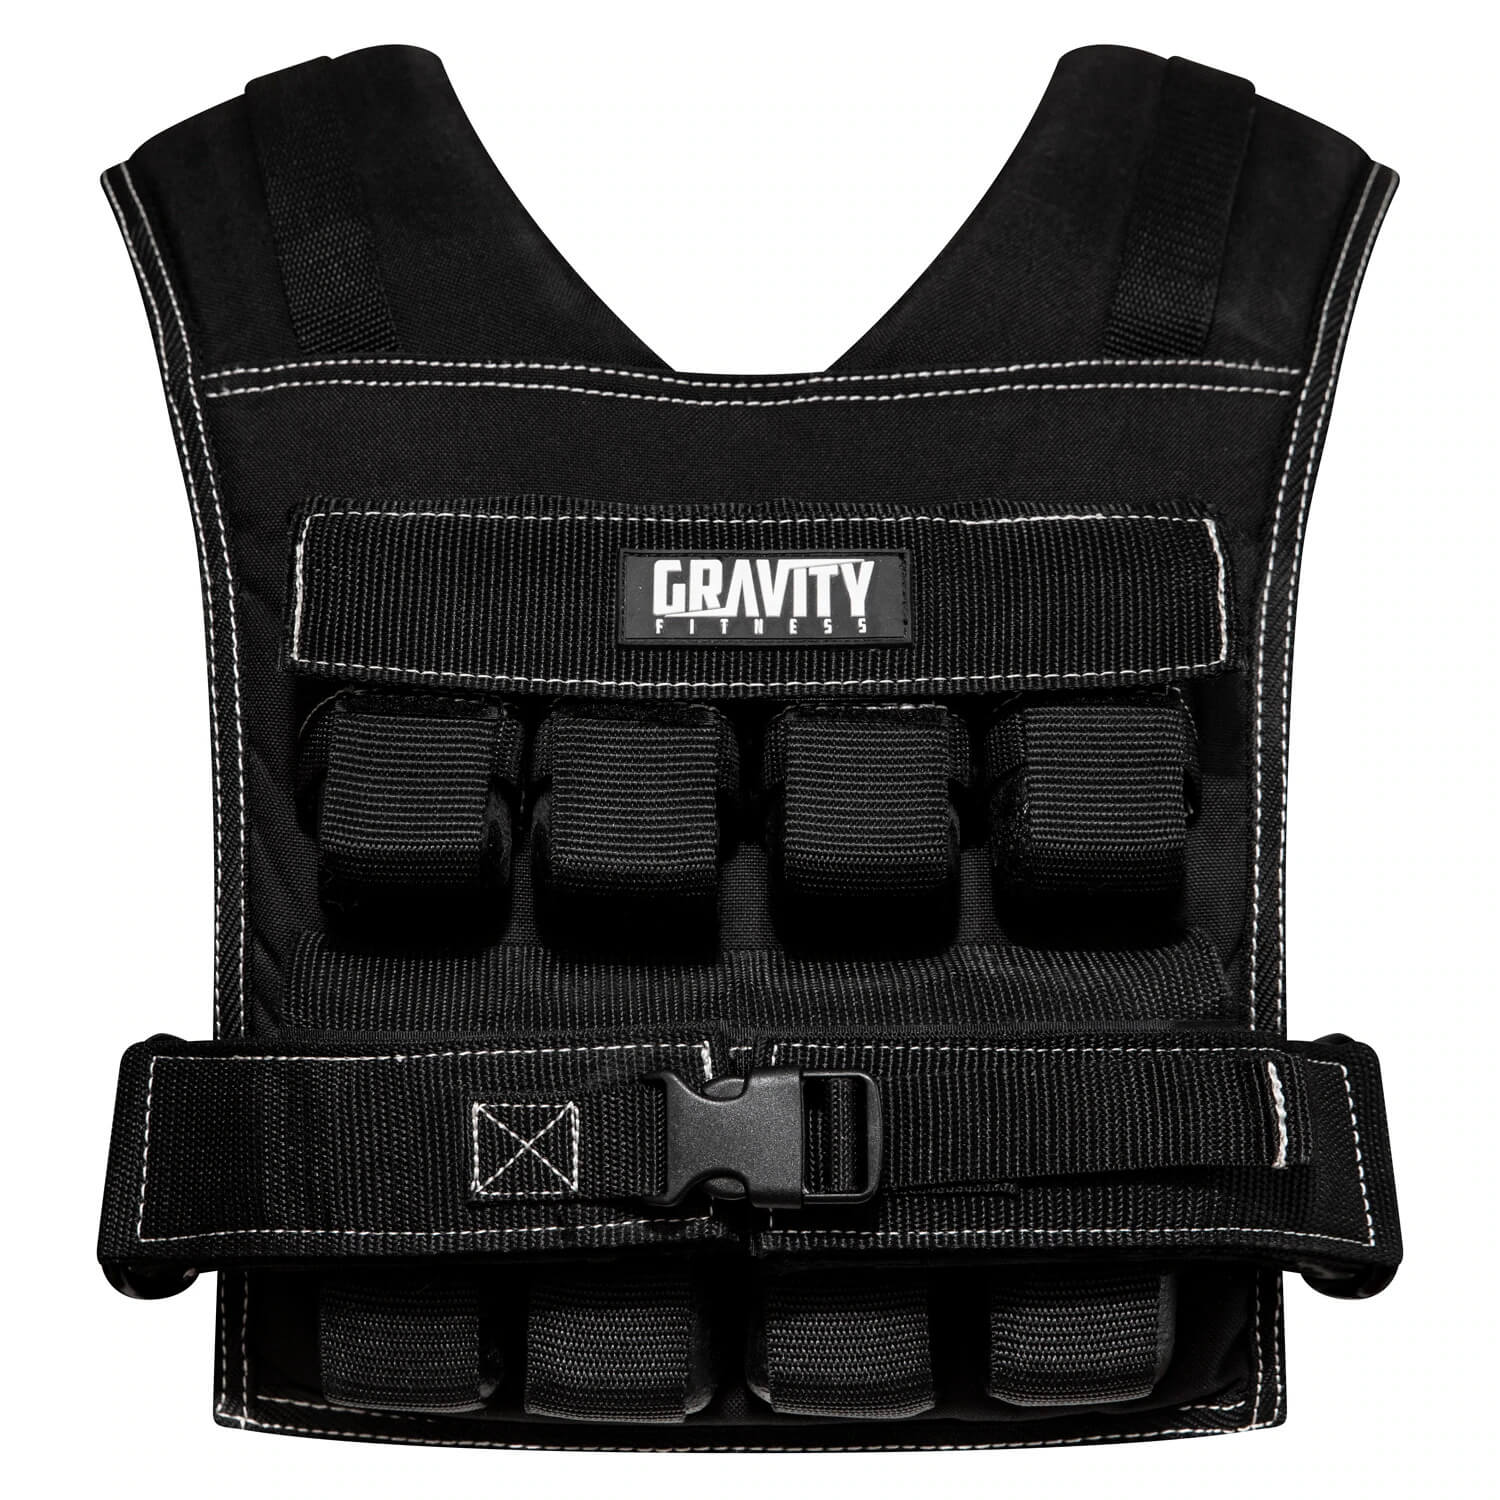 Black Infinity Weighted Vest 80 KGs plate carrier for gym fitness  callisthenics crossfit press ups dips handstands squats